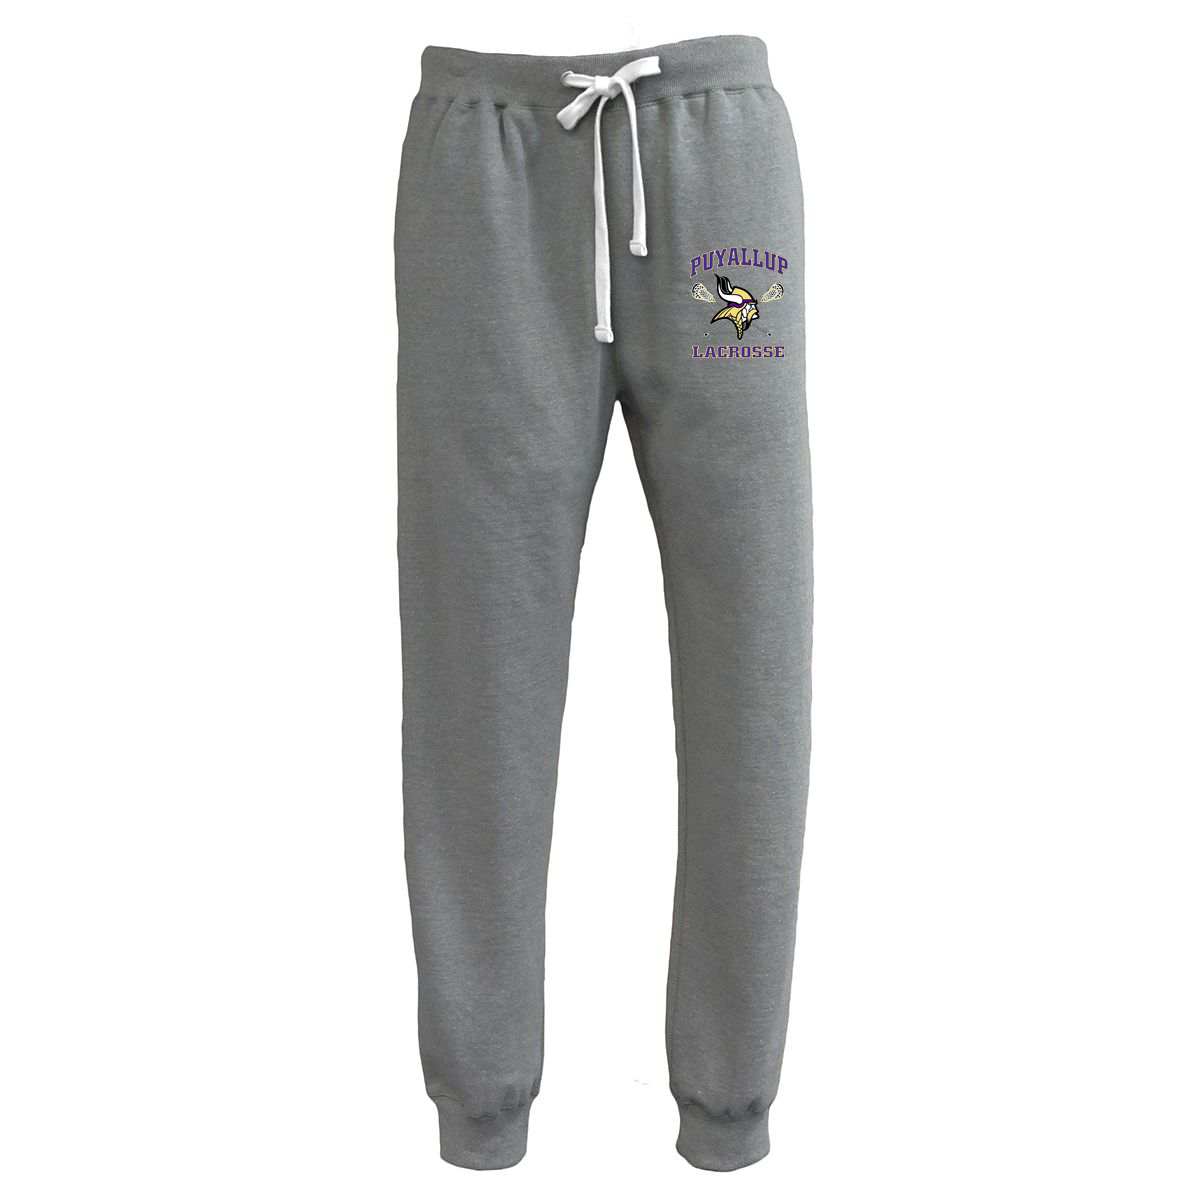 Puyallup Lacrosse Grey Joggers